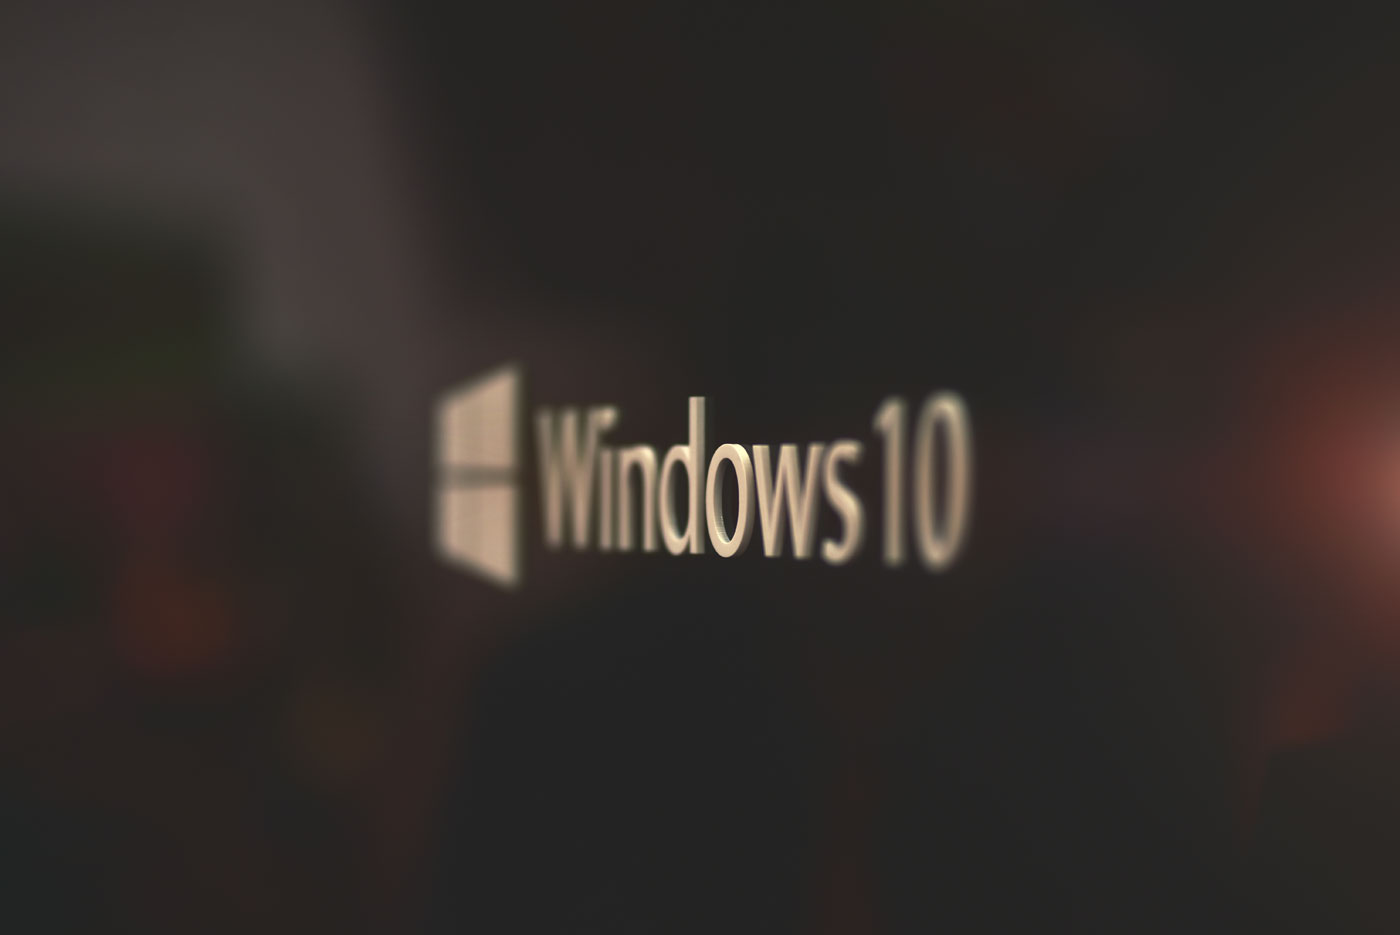 Windows 10 logo on a metallic surface in selective focus with warm tones indicating the End of Life update alert